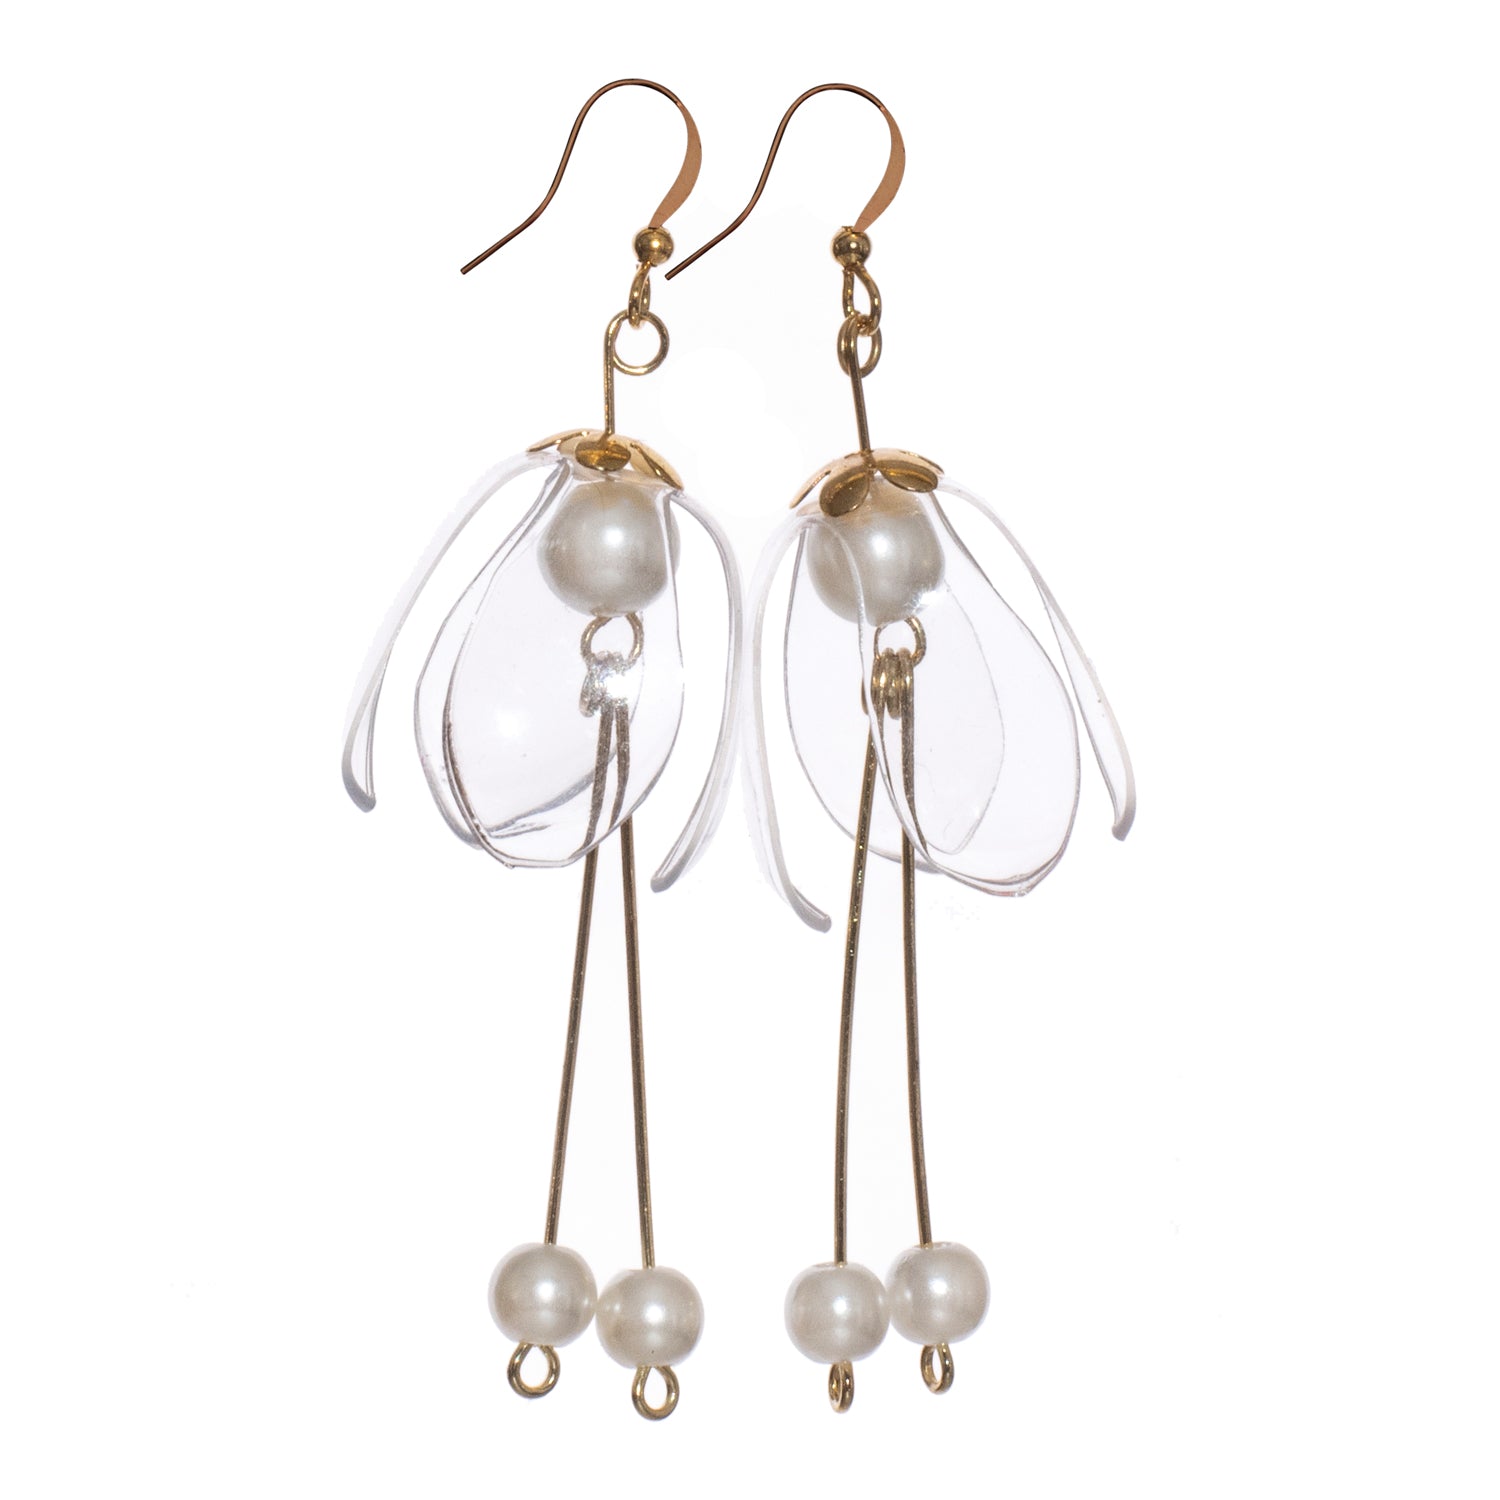 Clear lily double drop earrings recycled jewelry